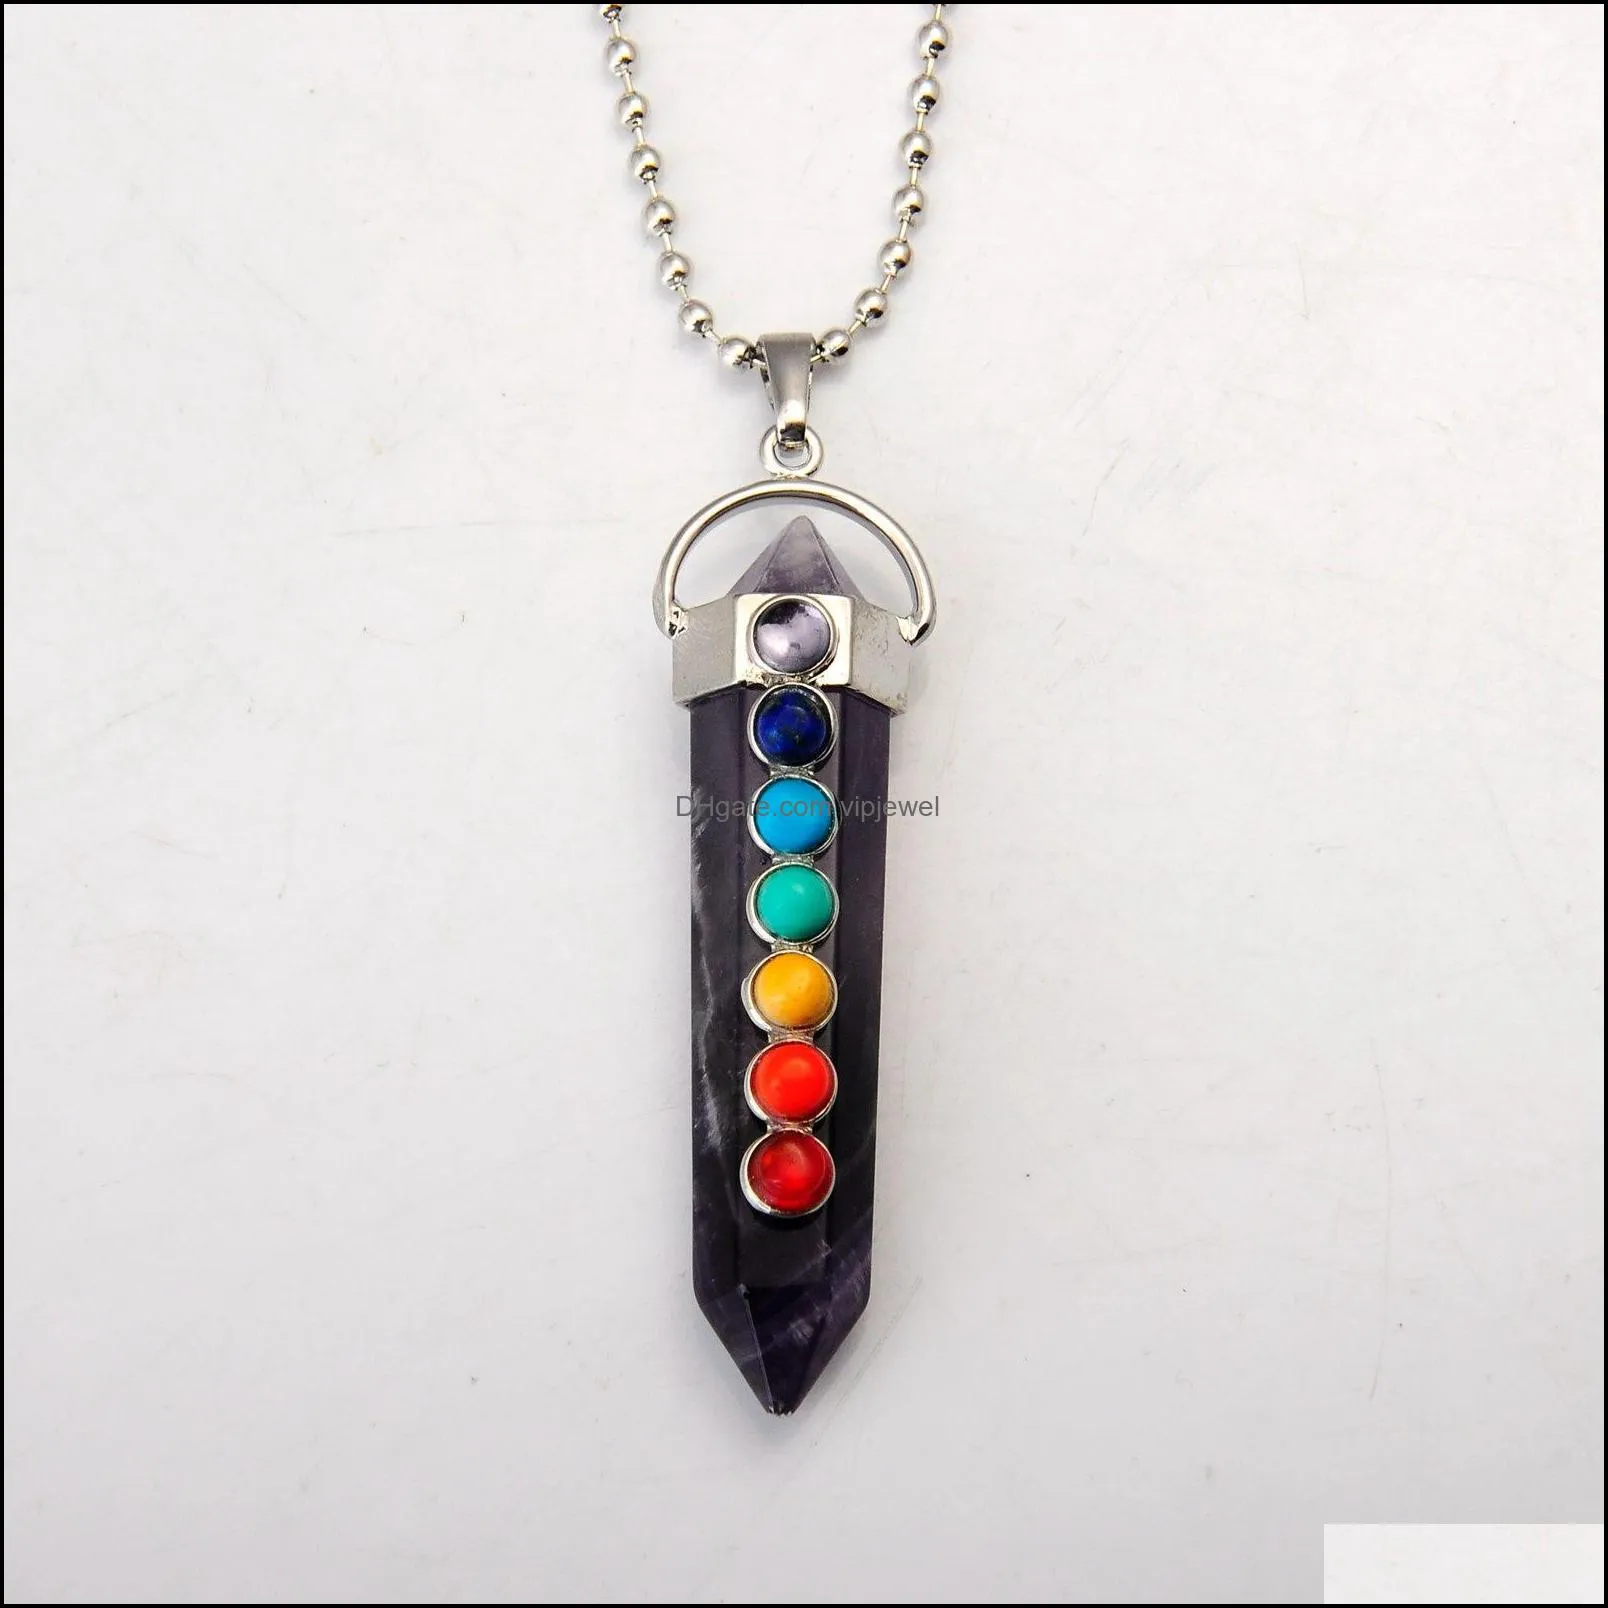 wholesales 2018 new style natural amethsyt reiki power gemstone necklace pendant with 7 crystal and silver findings 1pcs for fashion